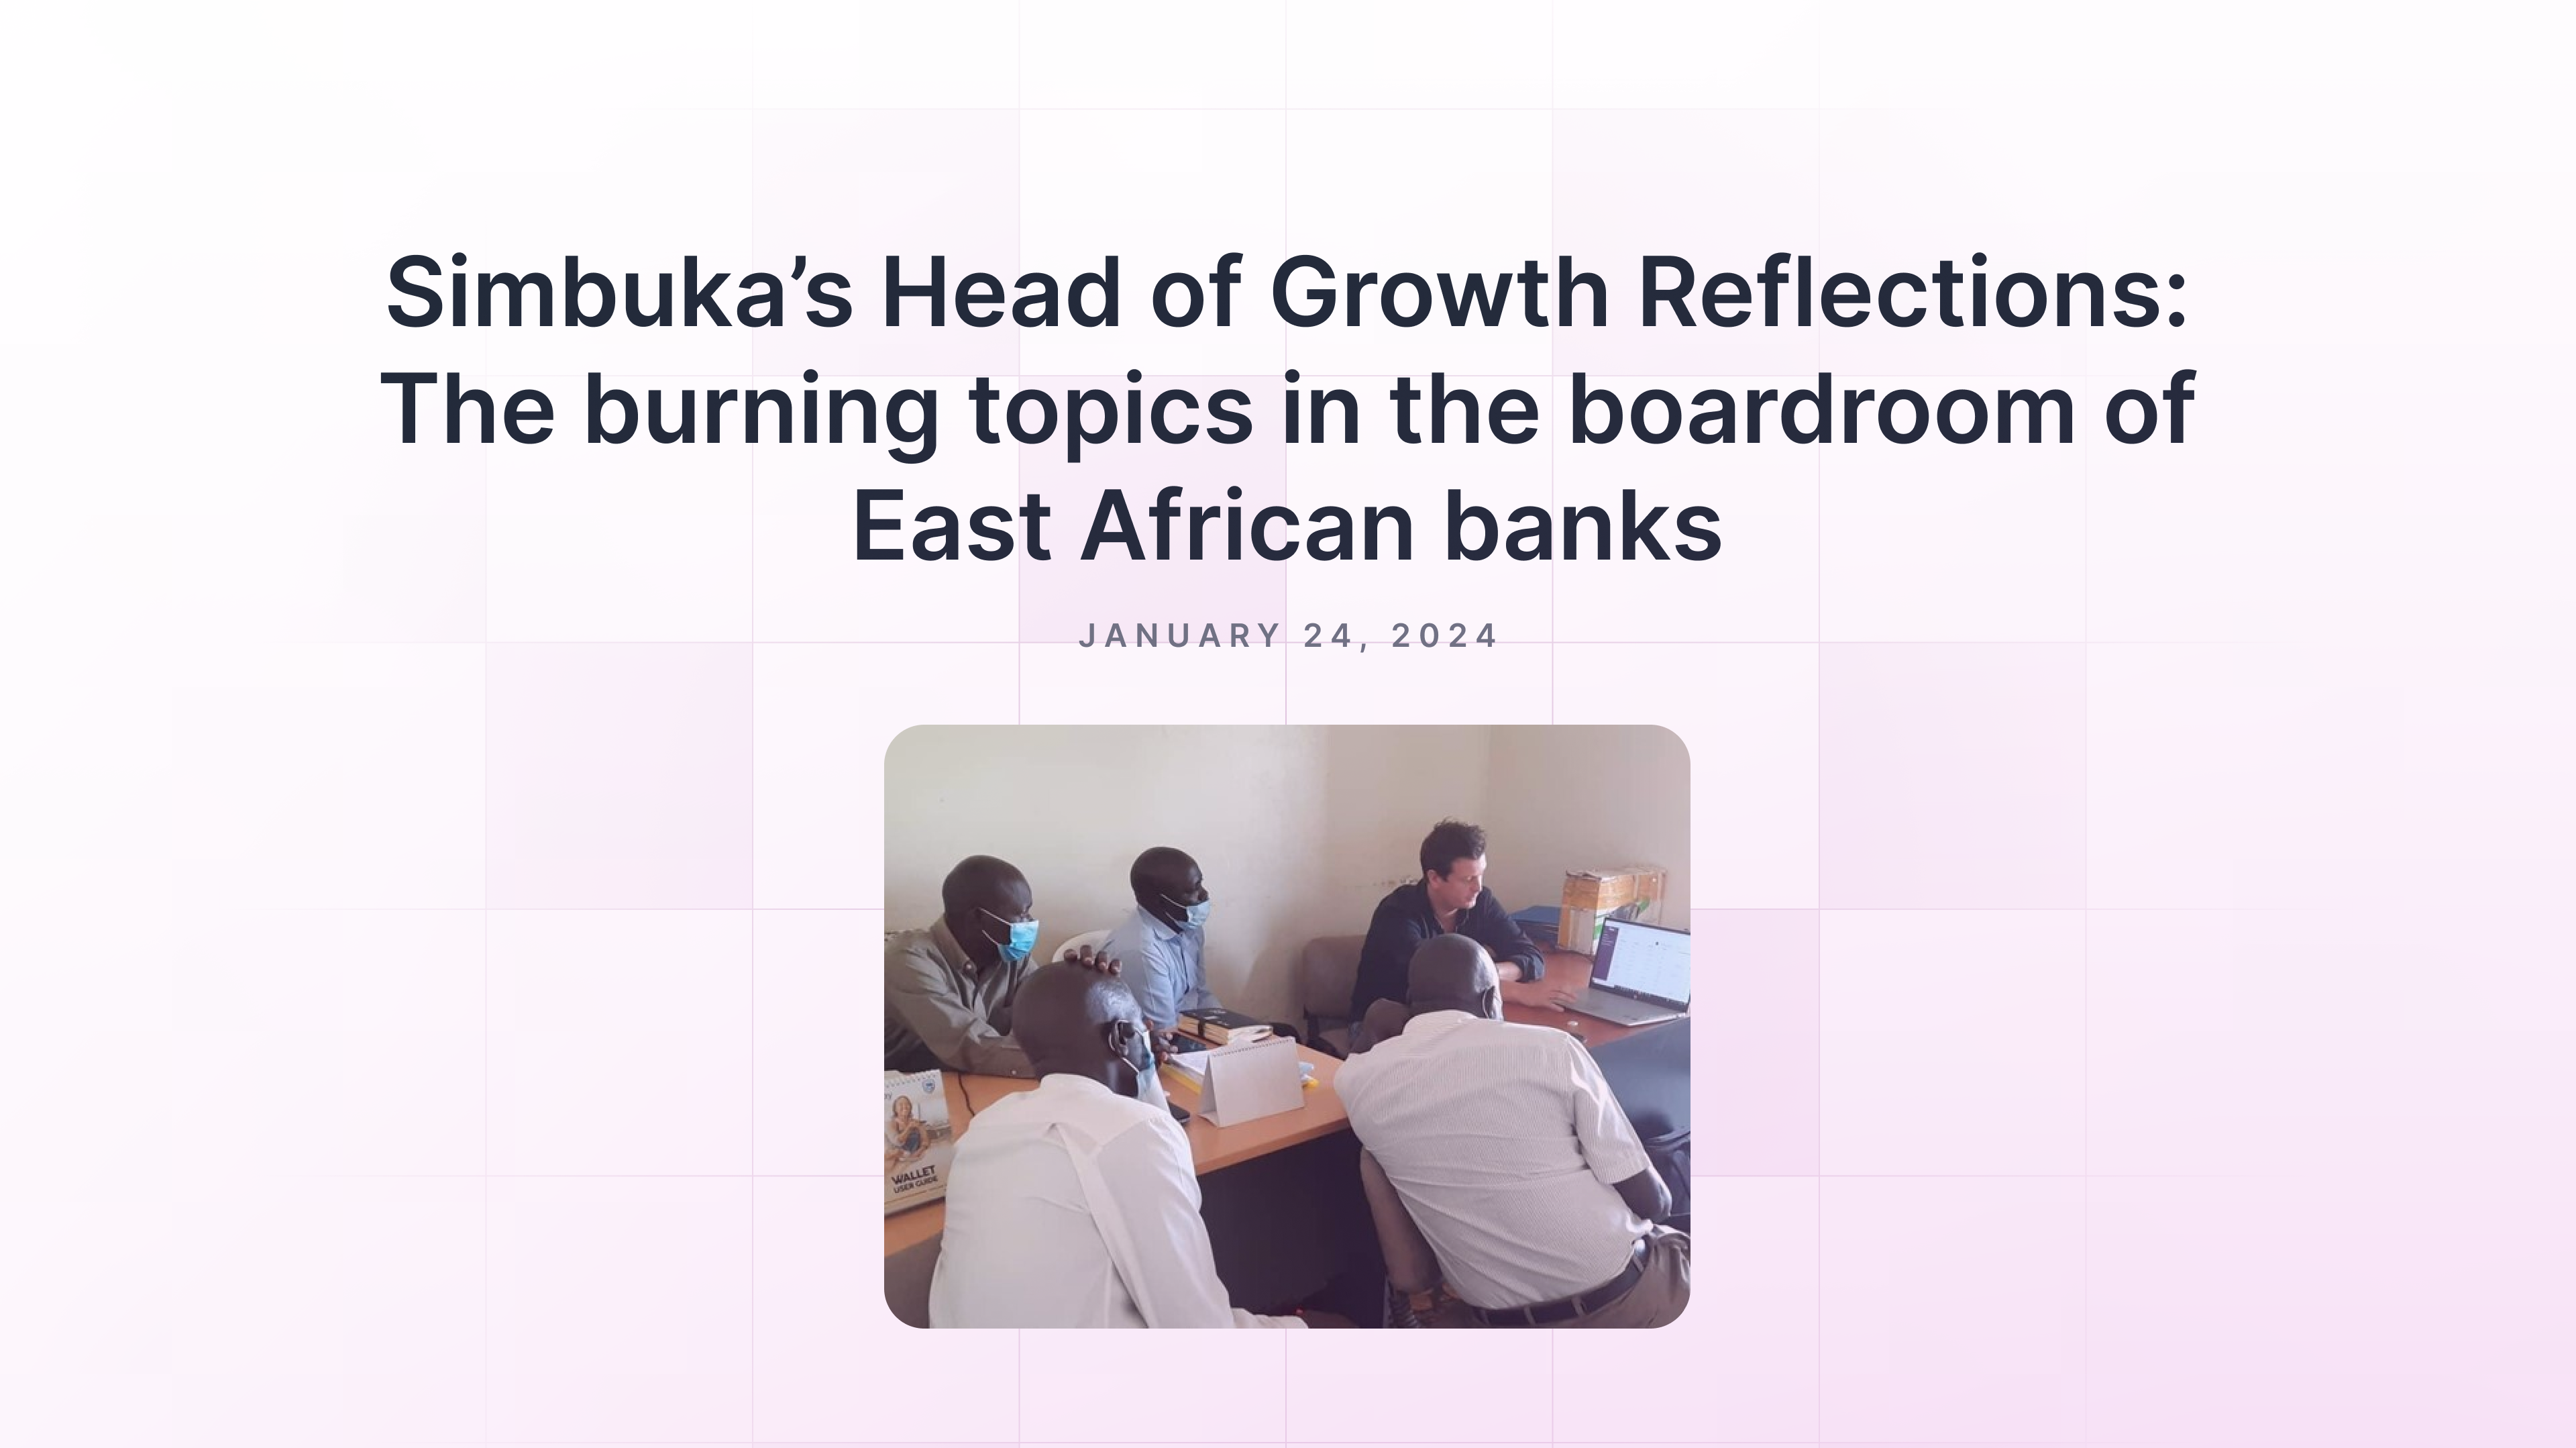 Simbuka’s Head of Growth Reflections: The burning topics in the boardroom of East African banks